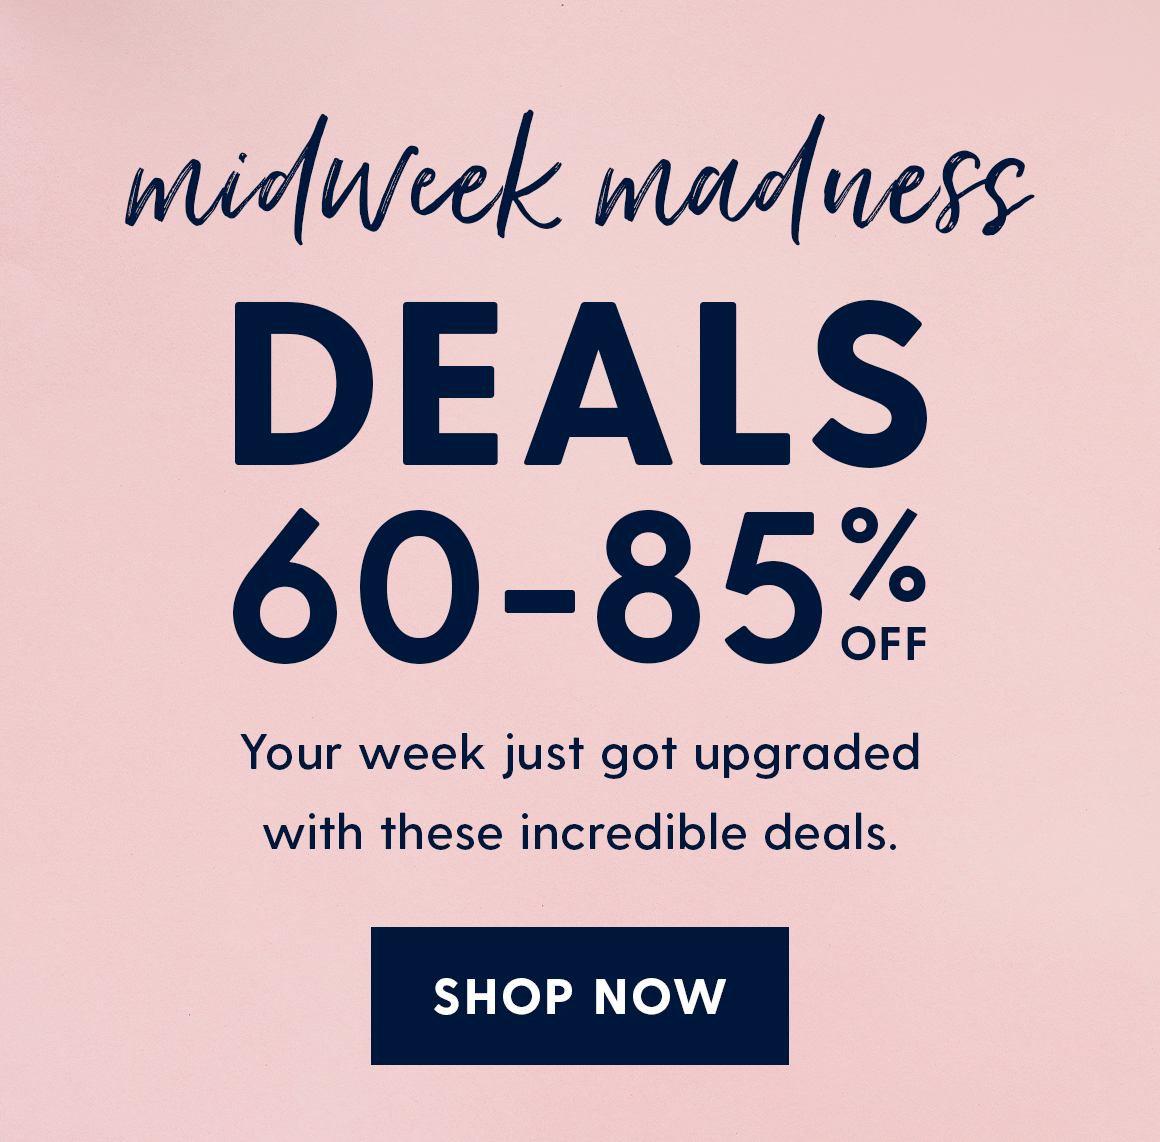 Midweek Madness. Deals 60-85% off. and they ship free. Shop now. 